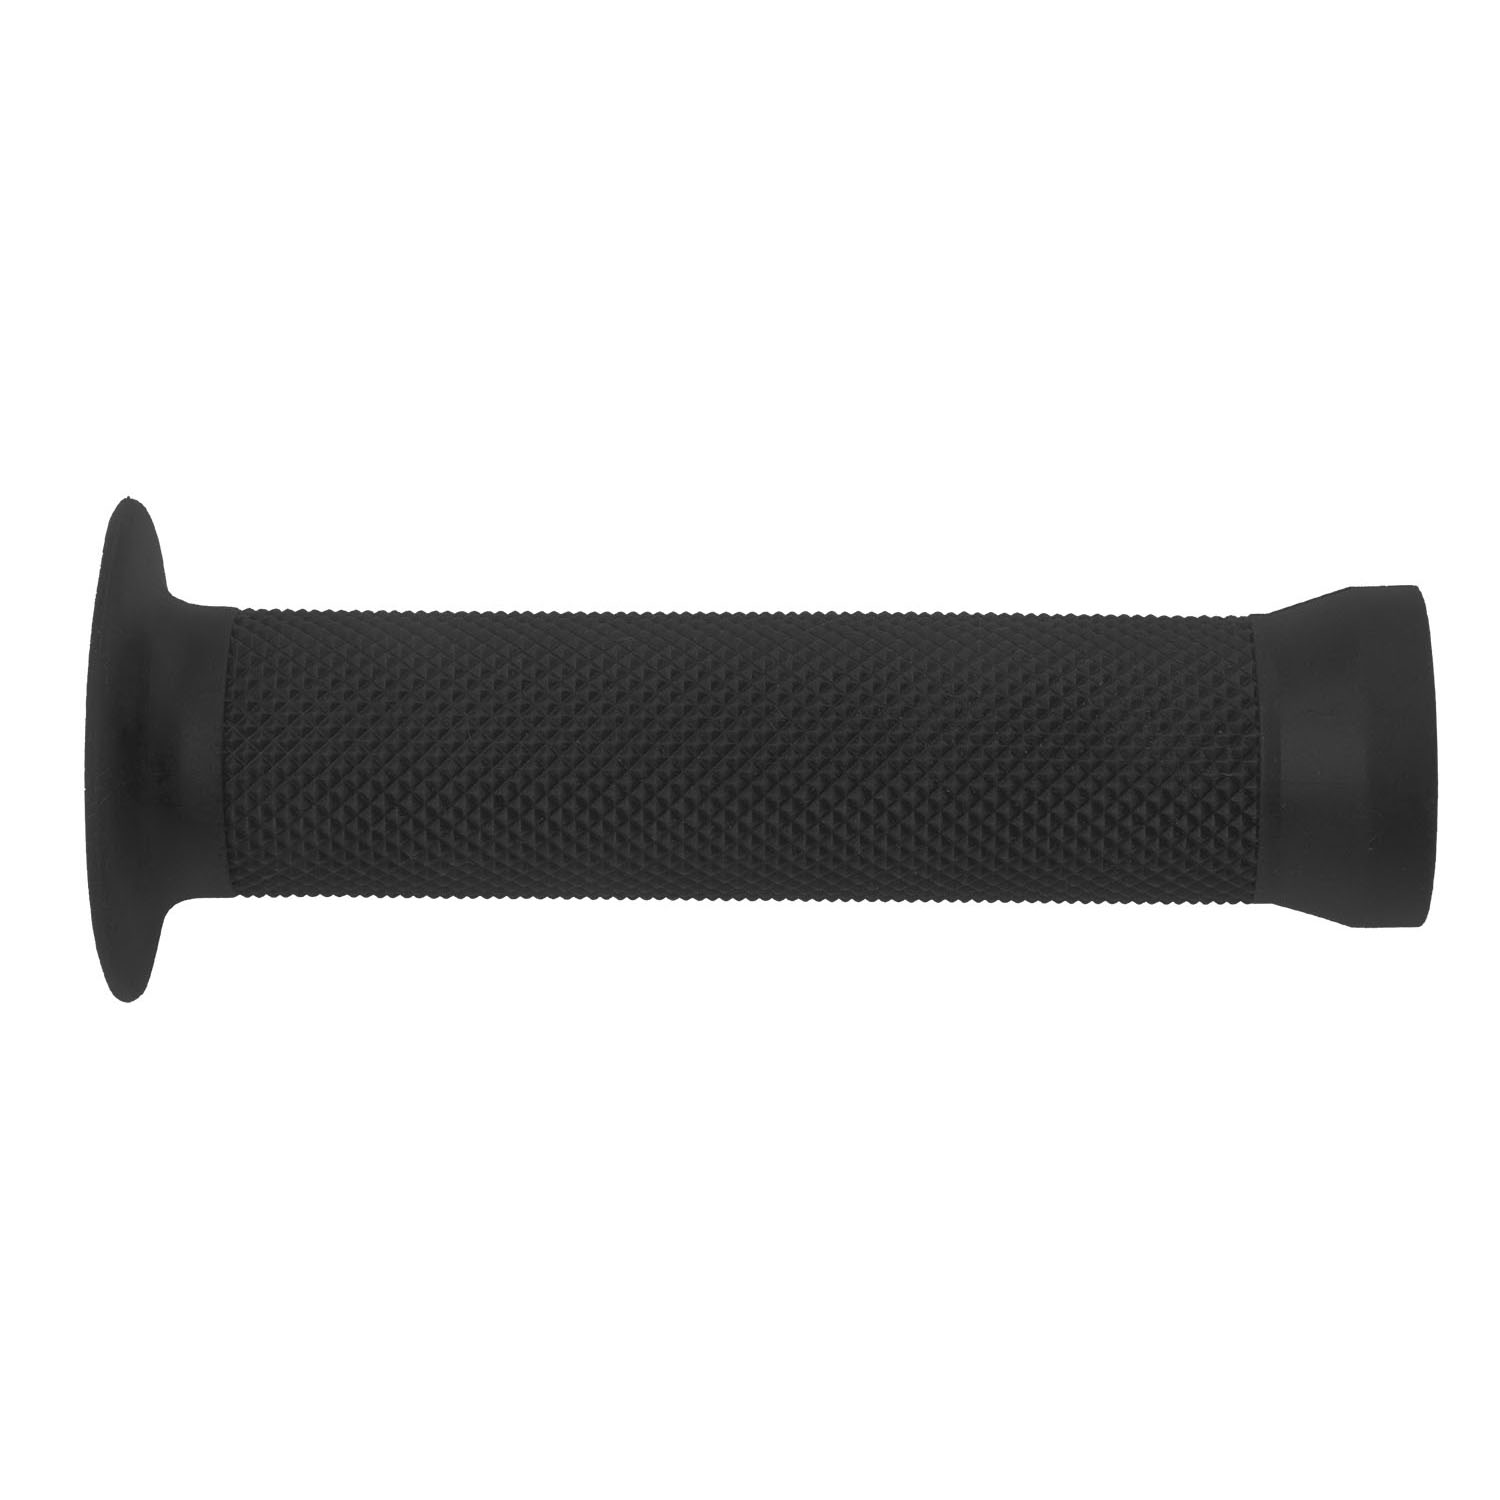 410220 BMX 130 bicycle grips – AVAILABLE IN SELECTED BIKE SHOPS